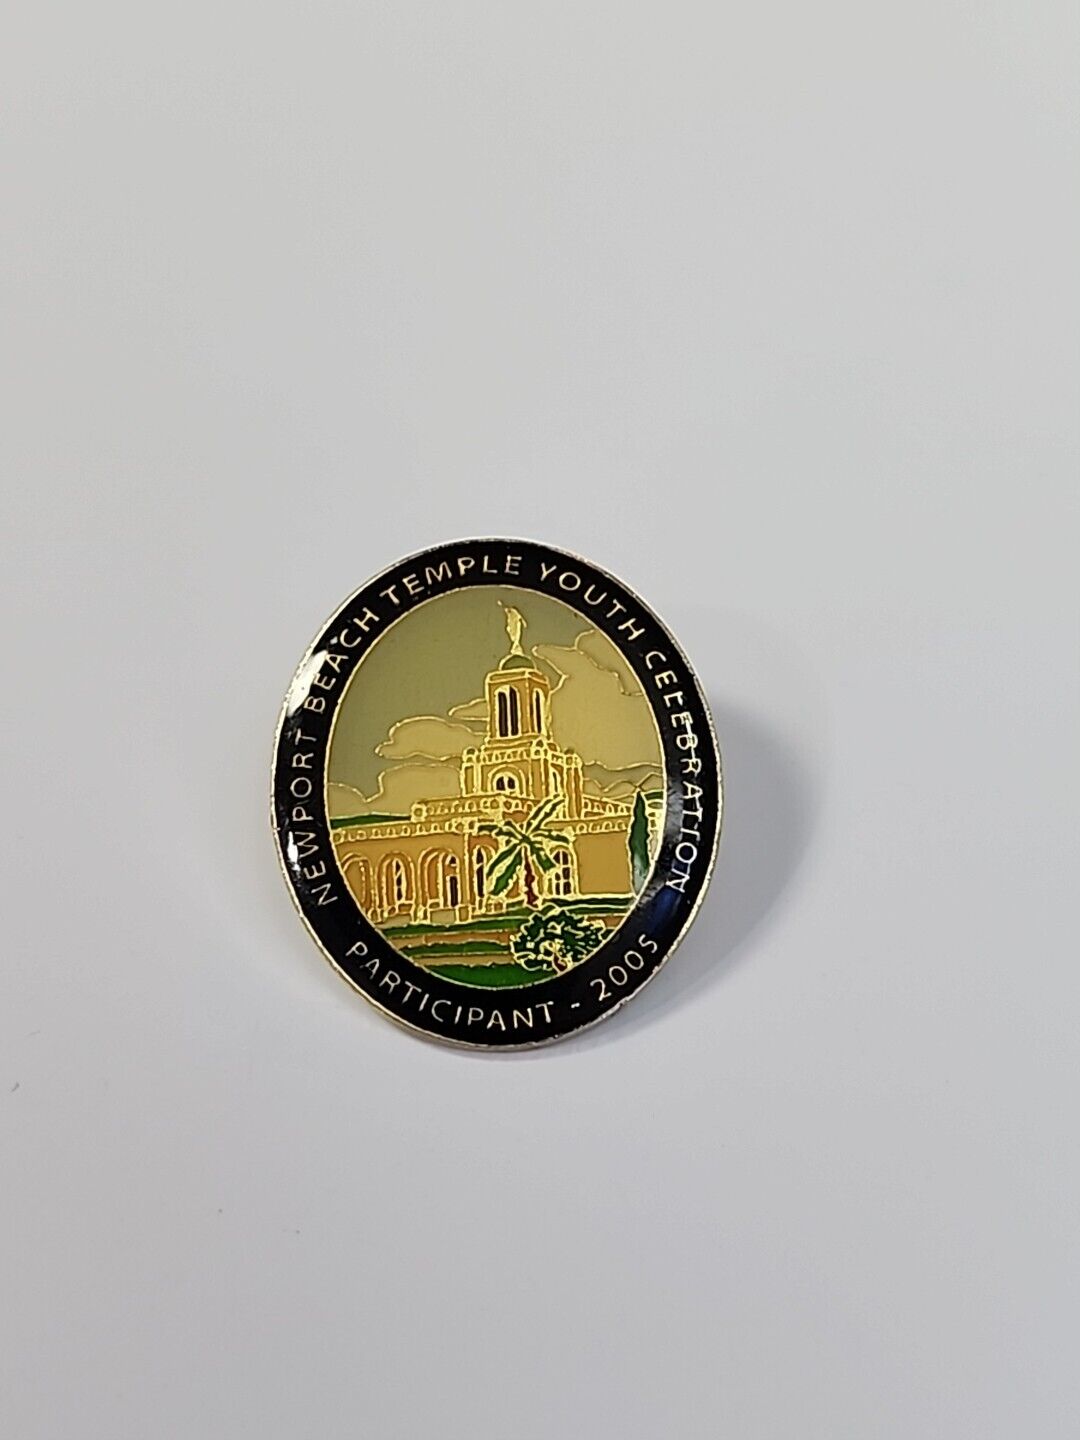 Newport Beach Temple Youth Celebration Participant 2005 Badge Pin